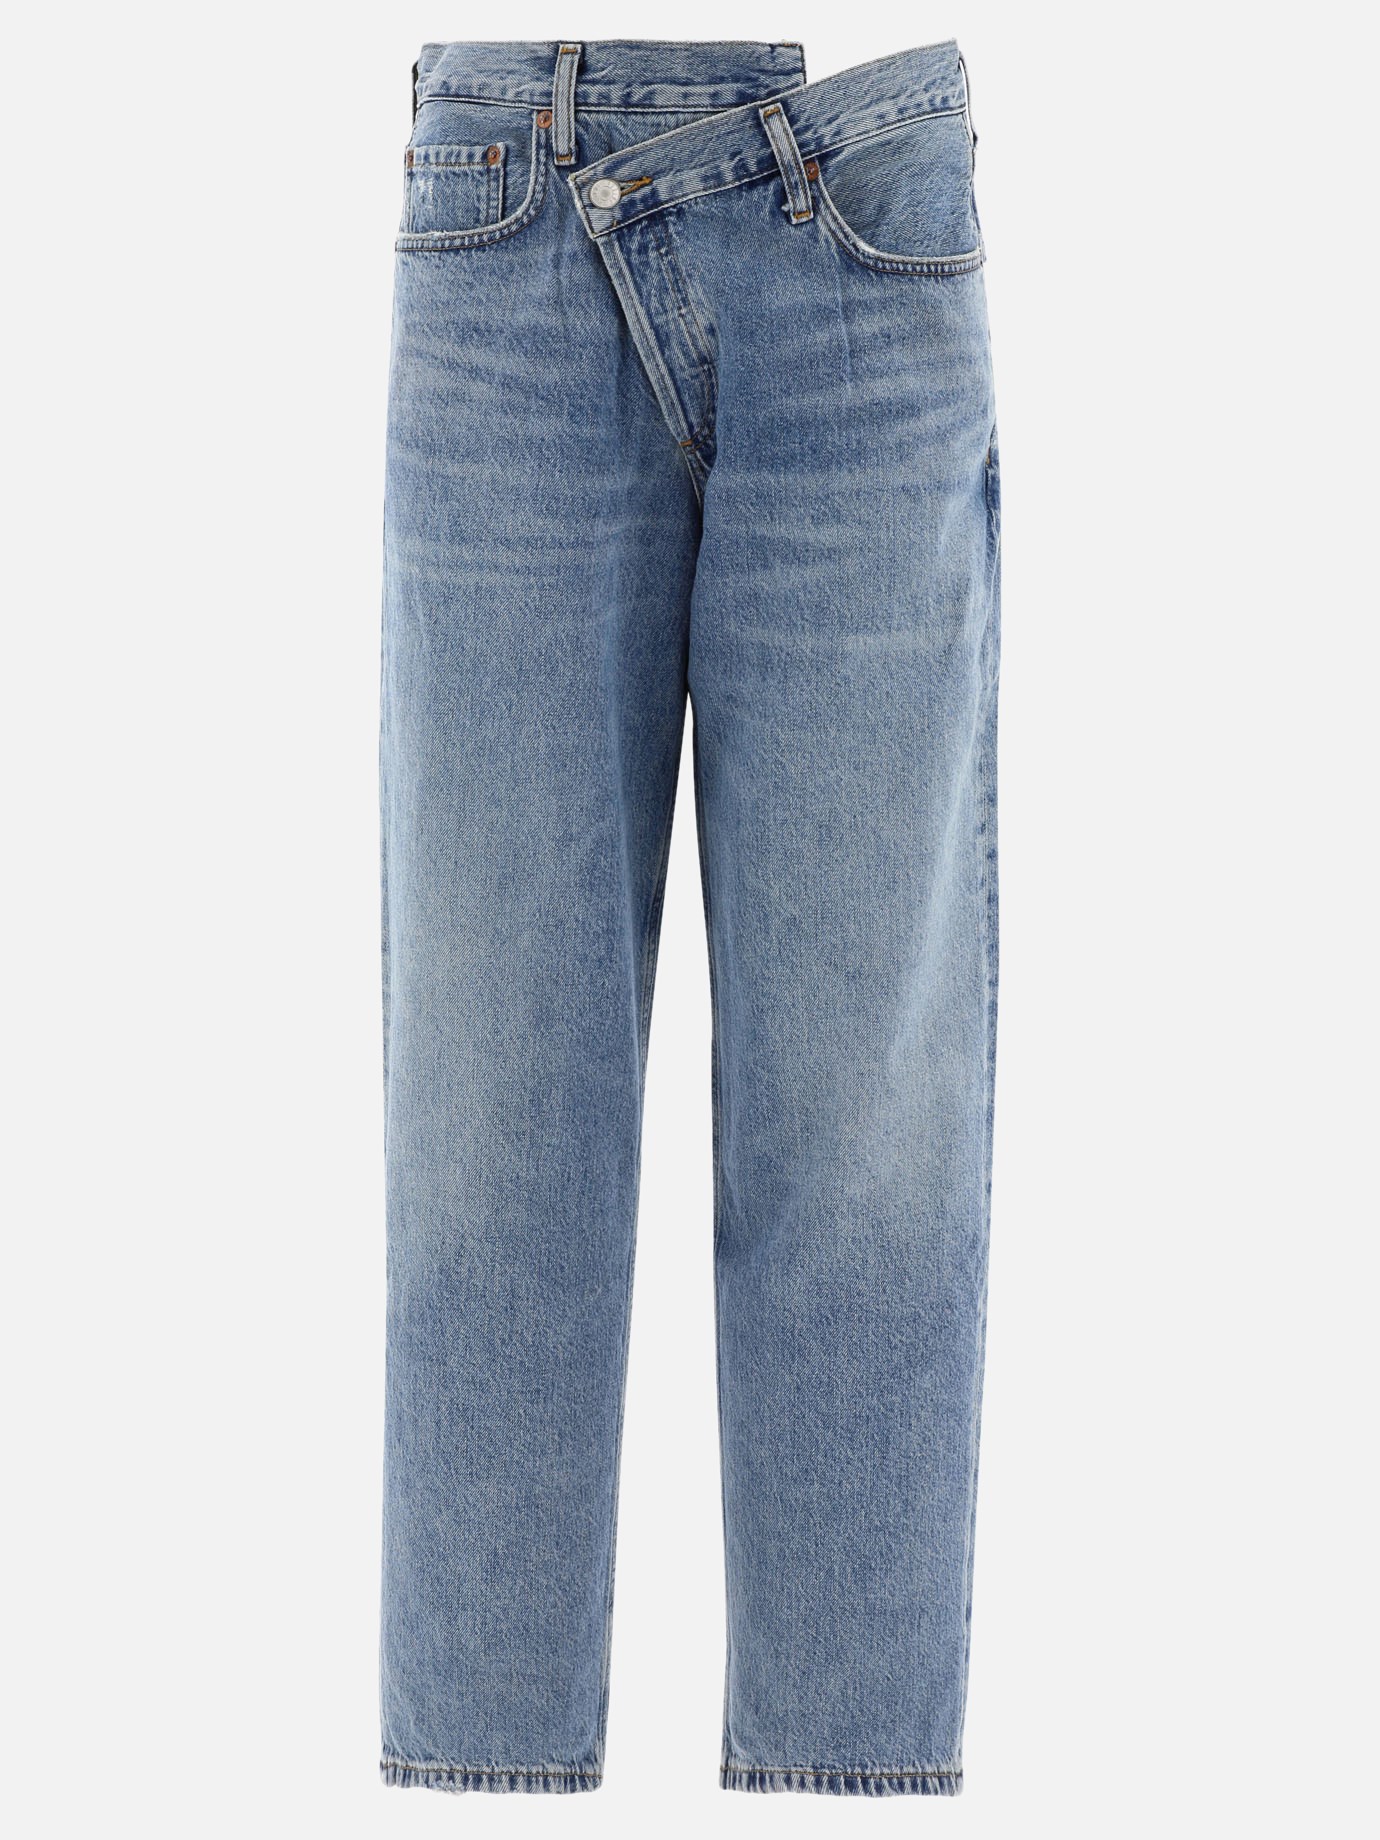 Jeans  Criss Cross by Agolde - 2